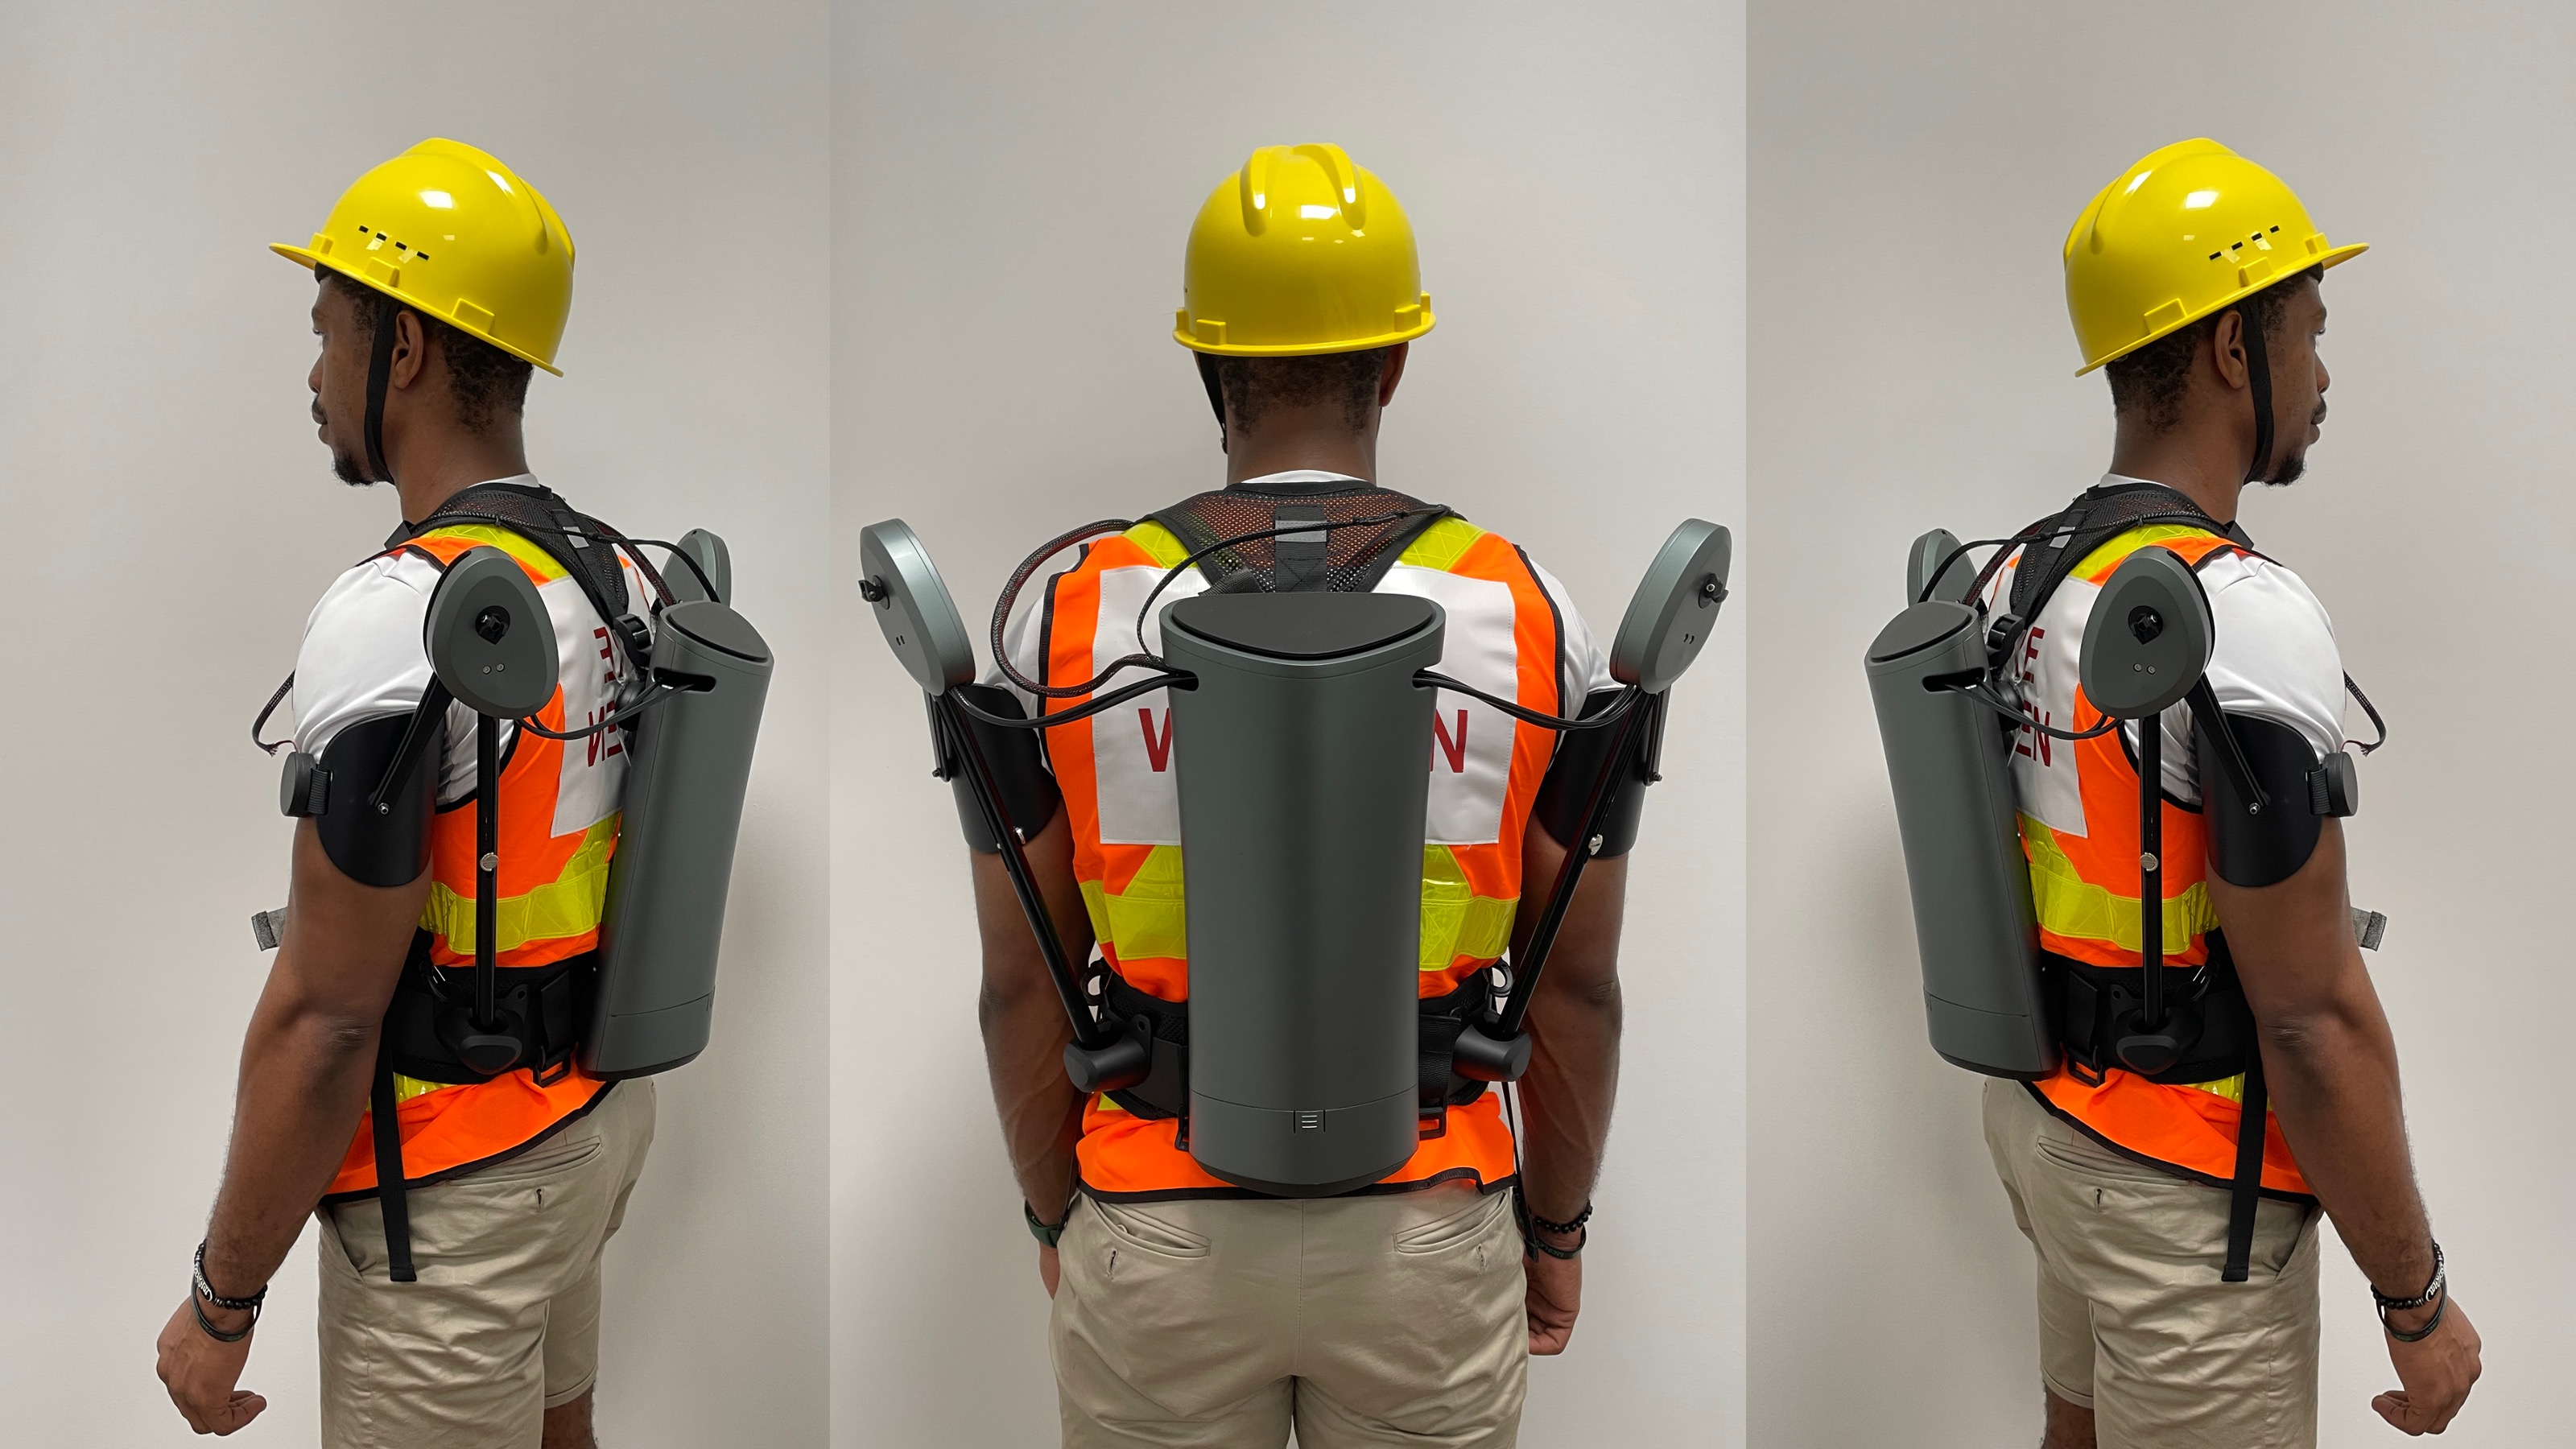 an image of a person wearing a back exoskeleton